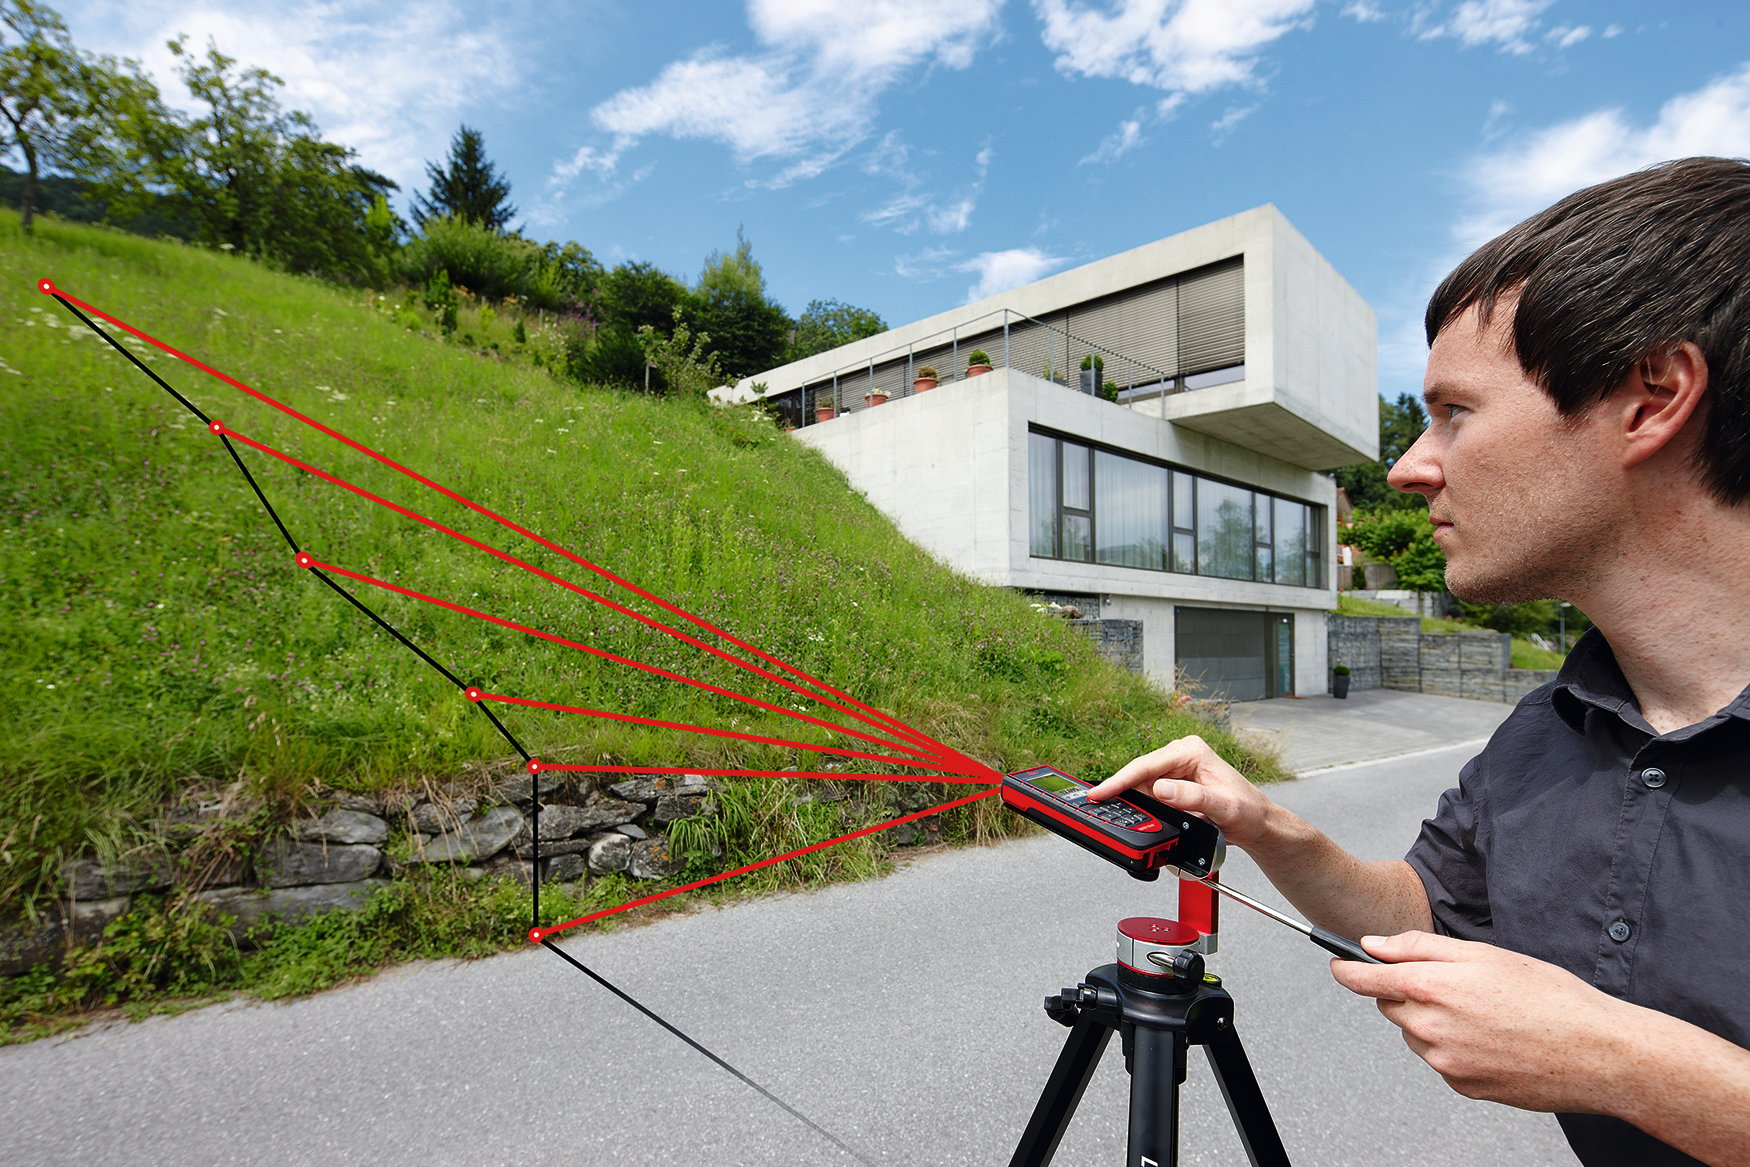 A man measures the height profile of a hillside with the Leica DISTO D510 laser measure